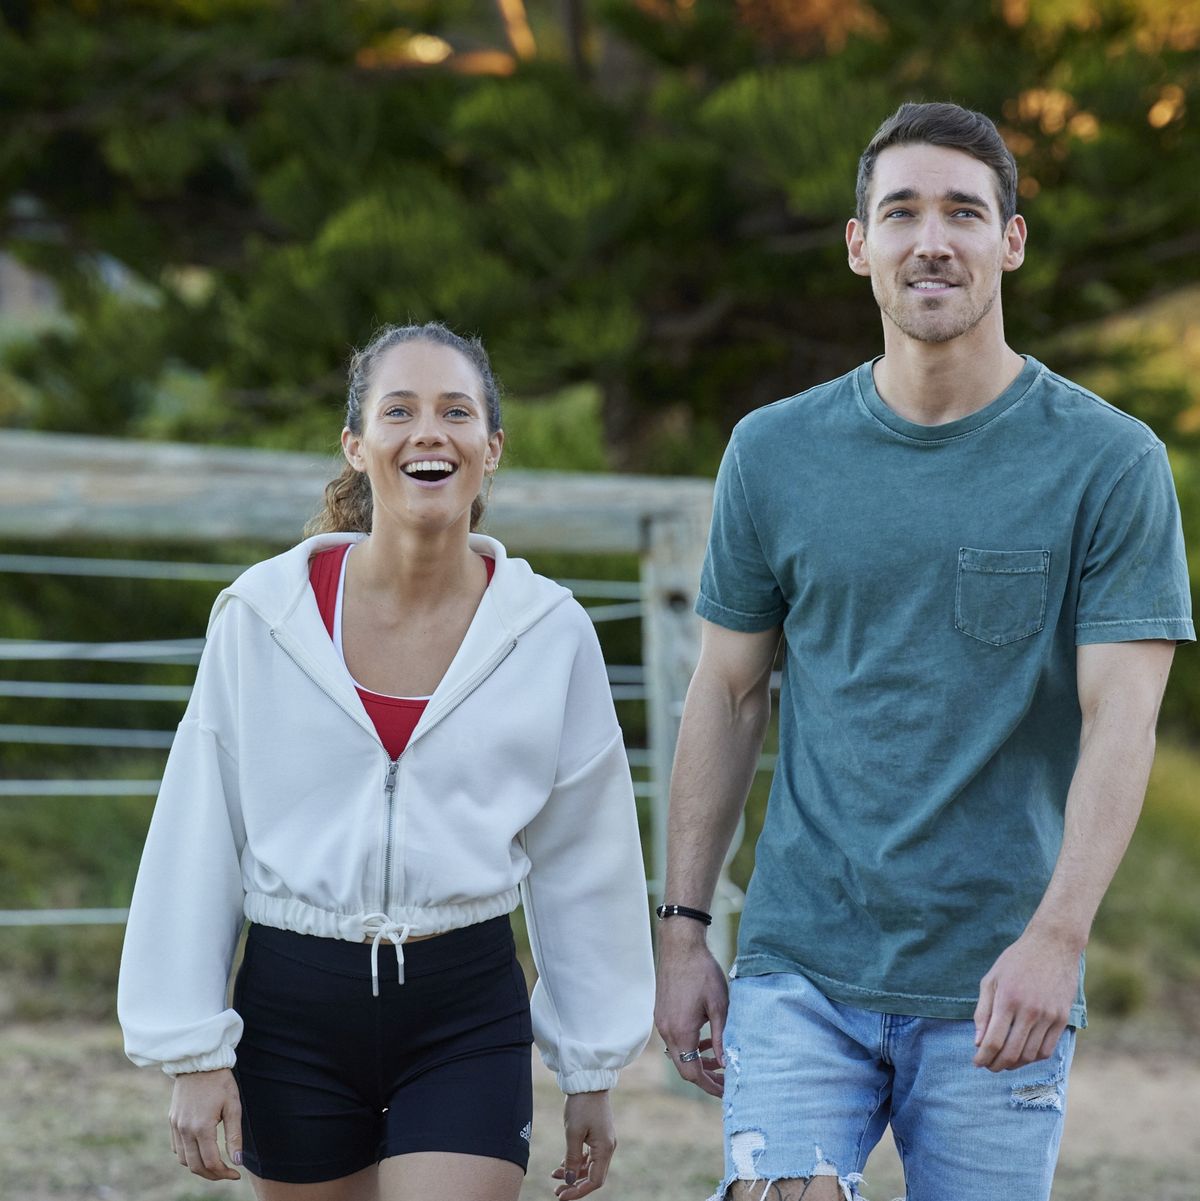 Home and Away spoilers - Xander faces surprise over Stacey